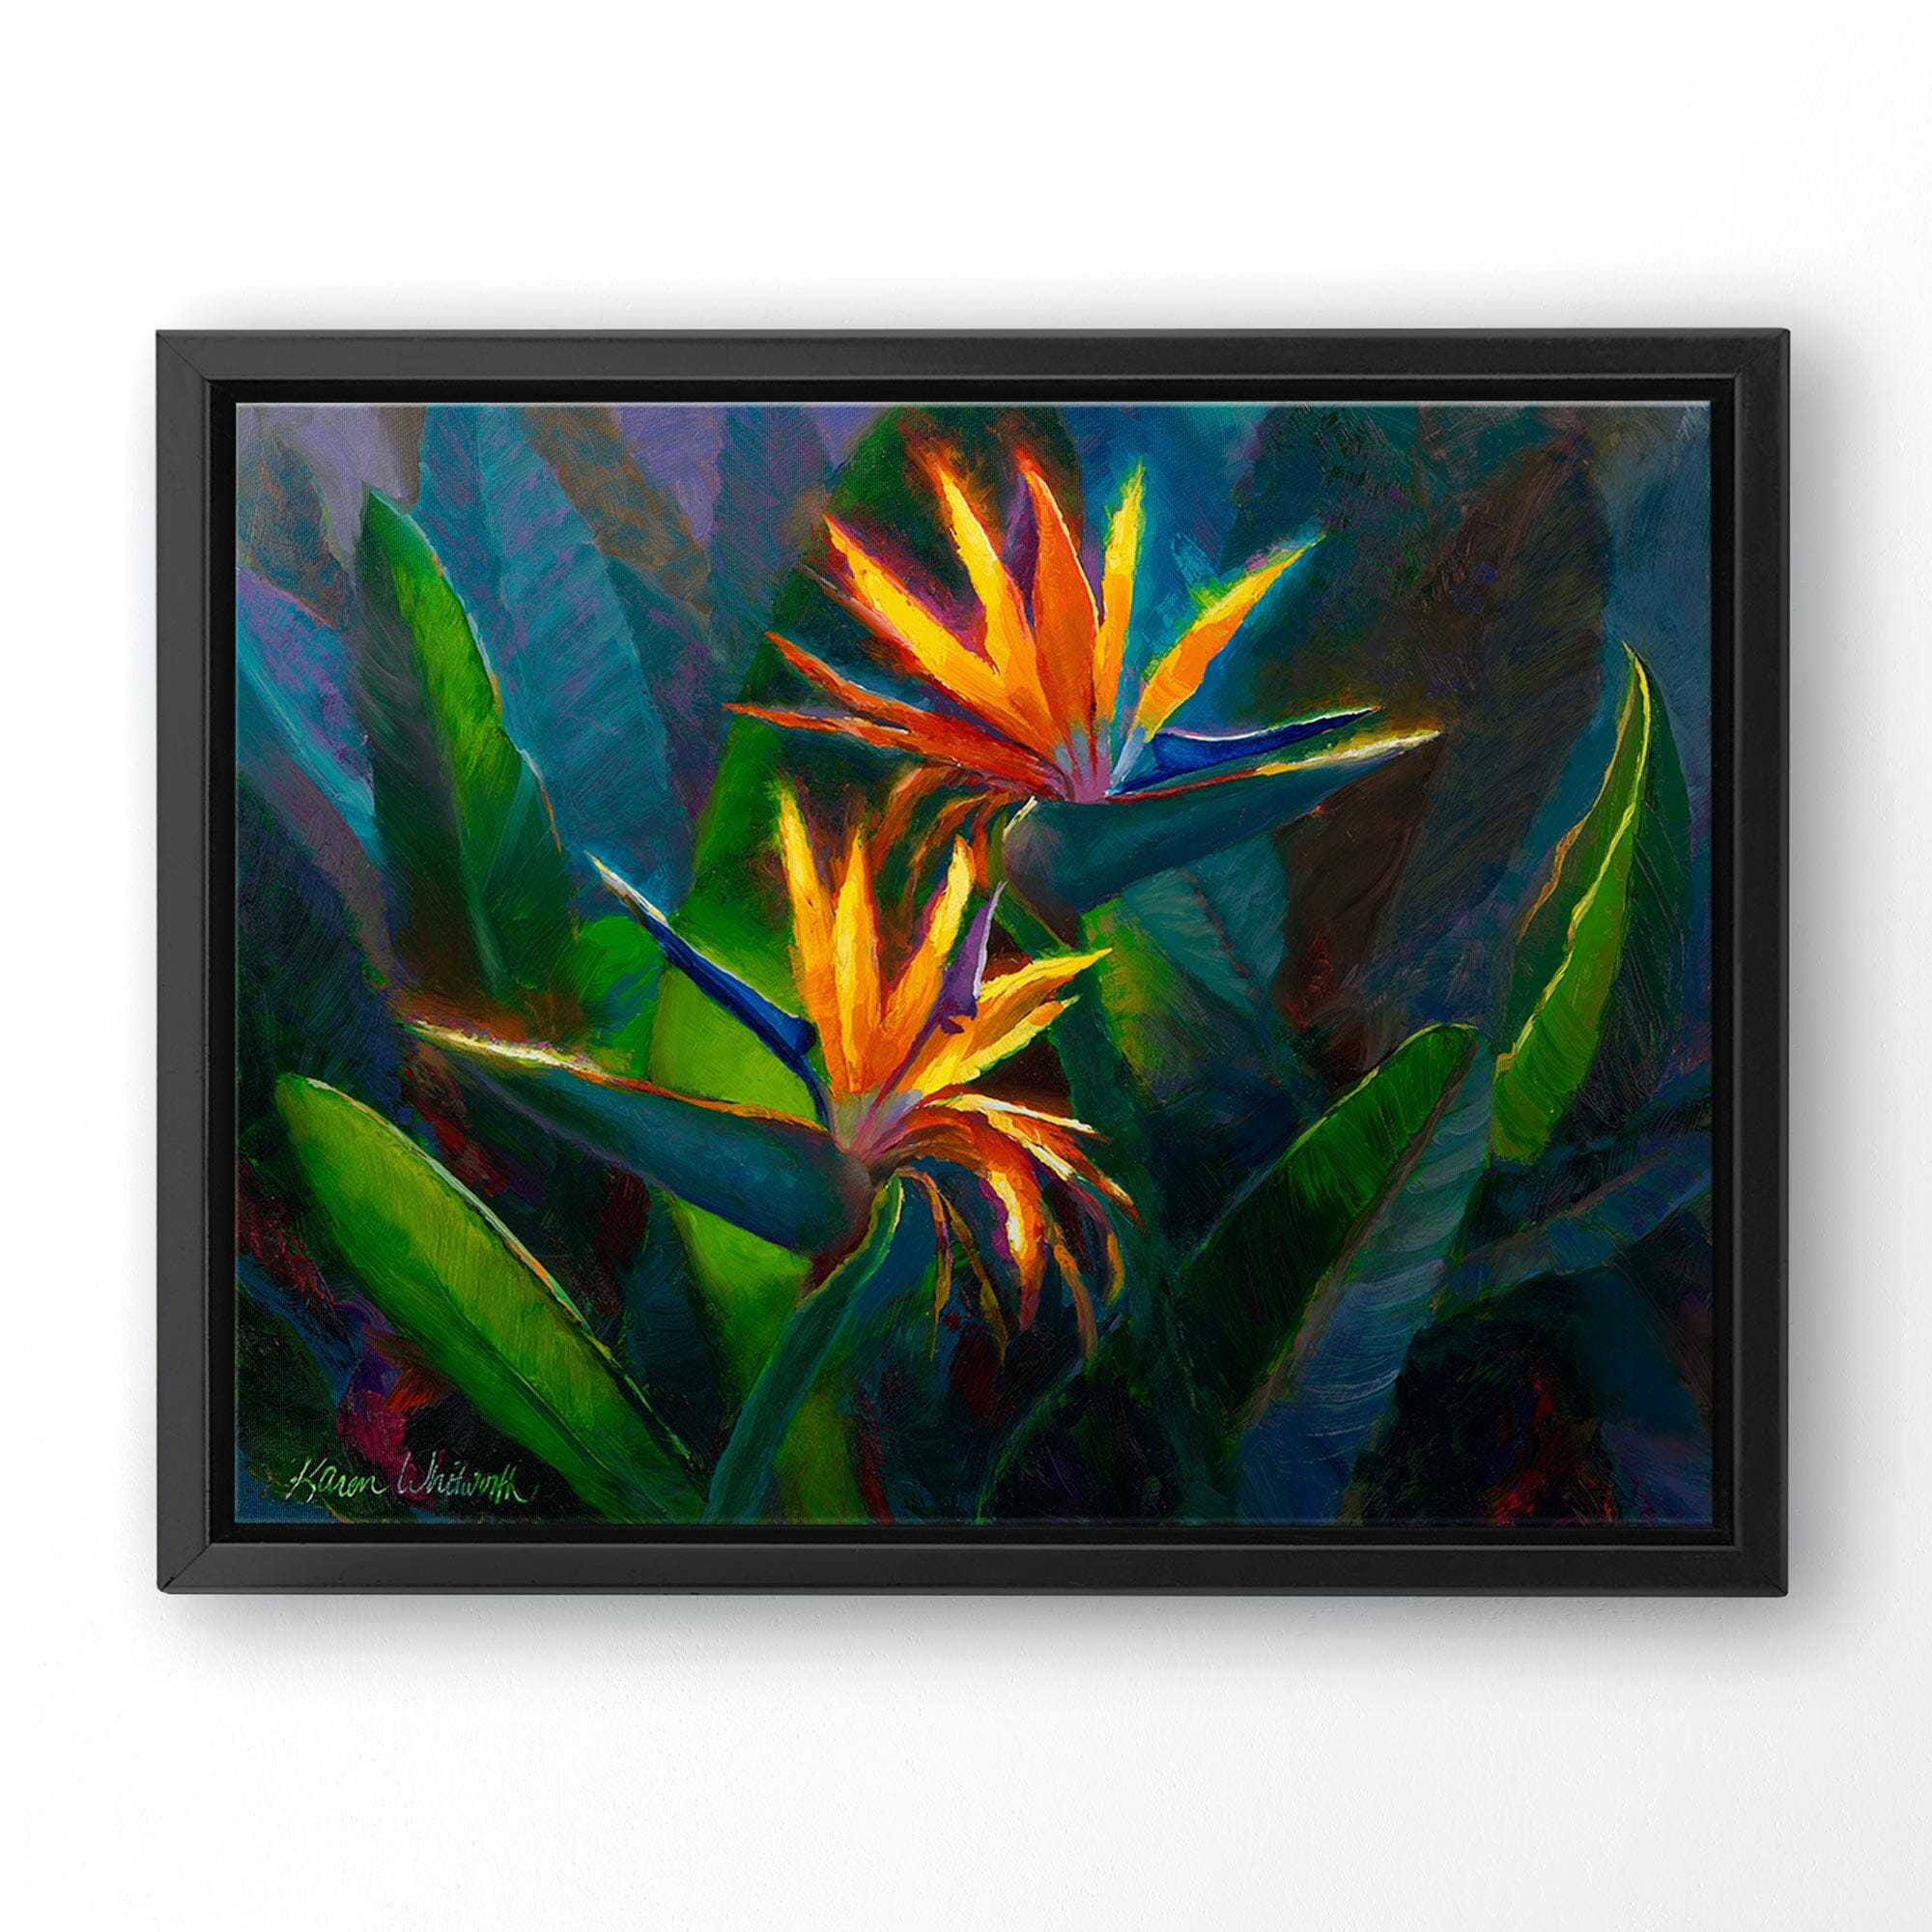 Hawaiian Flower Painting with tropical bird of paradise canvas art print by Hawaii artist Karen Whitworth. The artwork is framed in a black float frame and hanging on a white wall. 